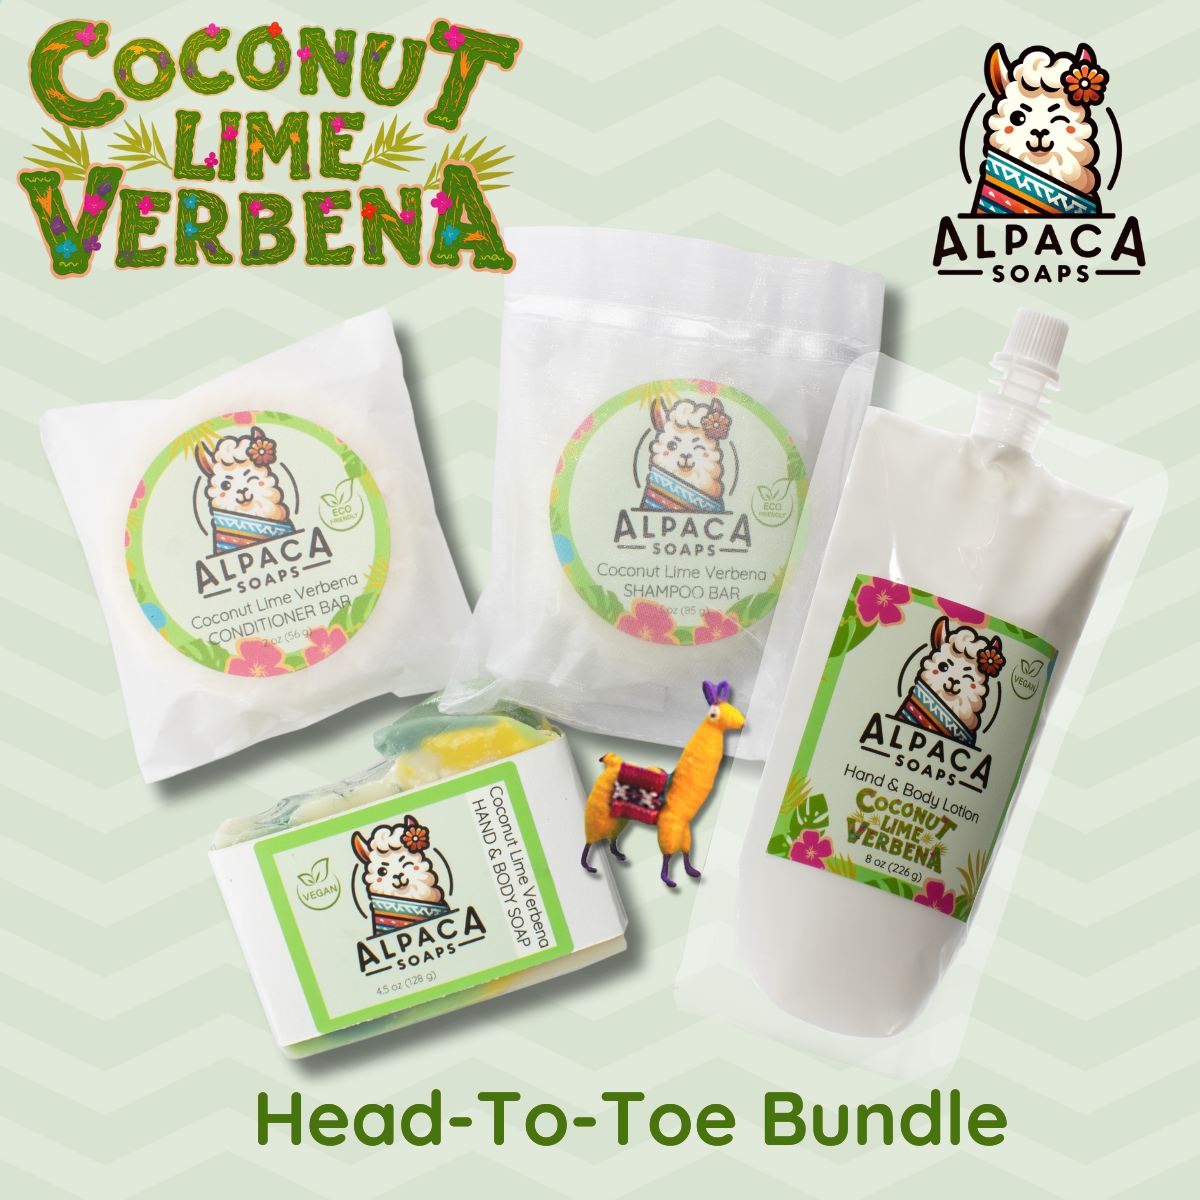 Head to Toe Bundle with shampoo, conditioner bar, soap, lotion and alpaca key chain. Flat lay on a lime green background